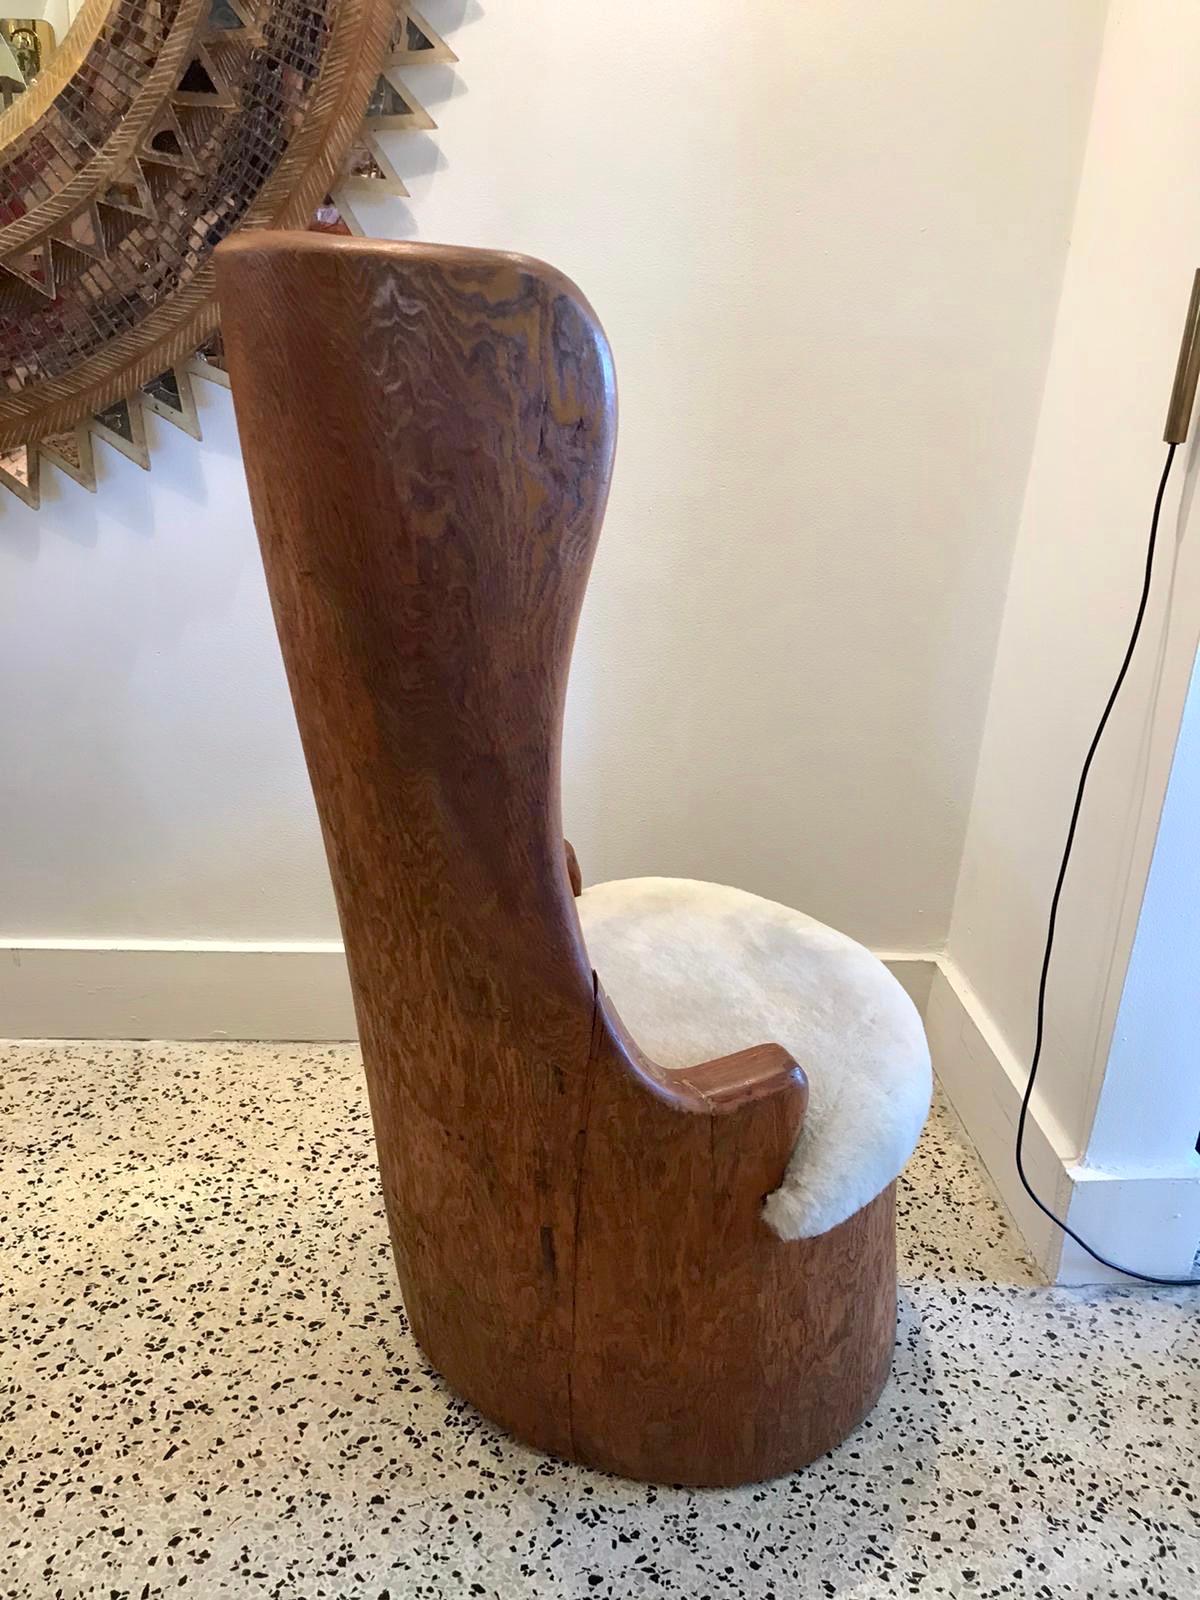 Vintage and artist made (signed and dated), one piece of wood trunk hand carved made to a small chair. In vintage as-found condition, we added a new shearling wool seat base. Artist signed Noddin' Chair, a bean patch original 1962. Very whimsical